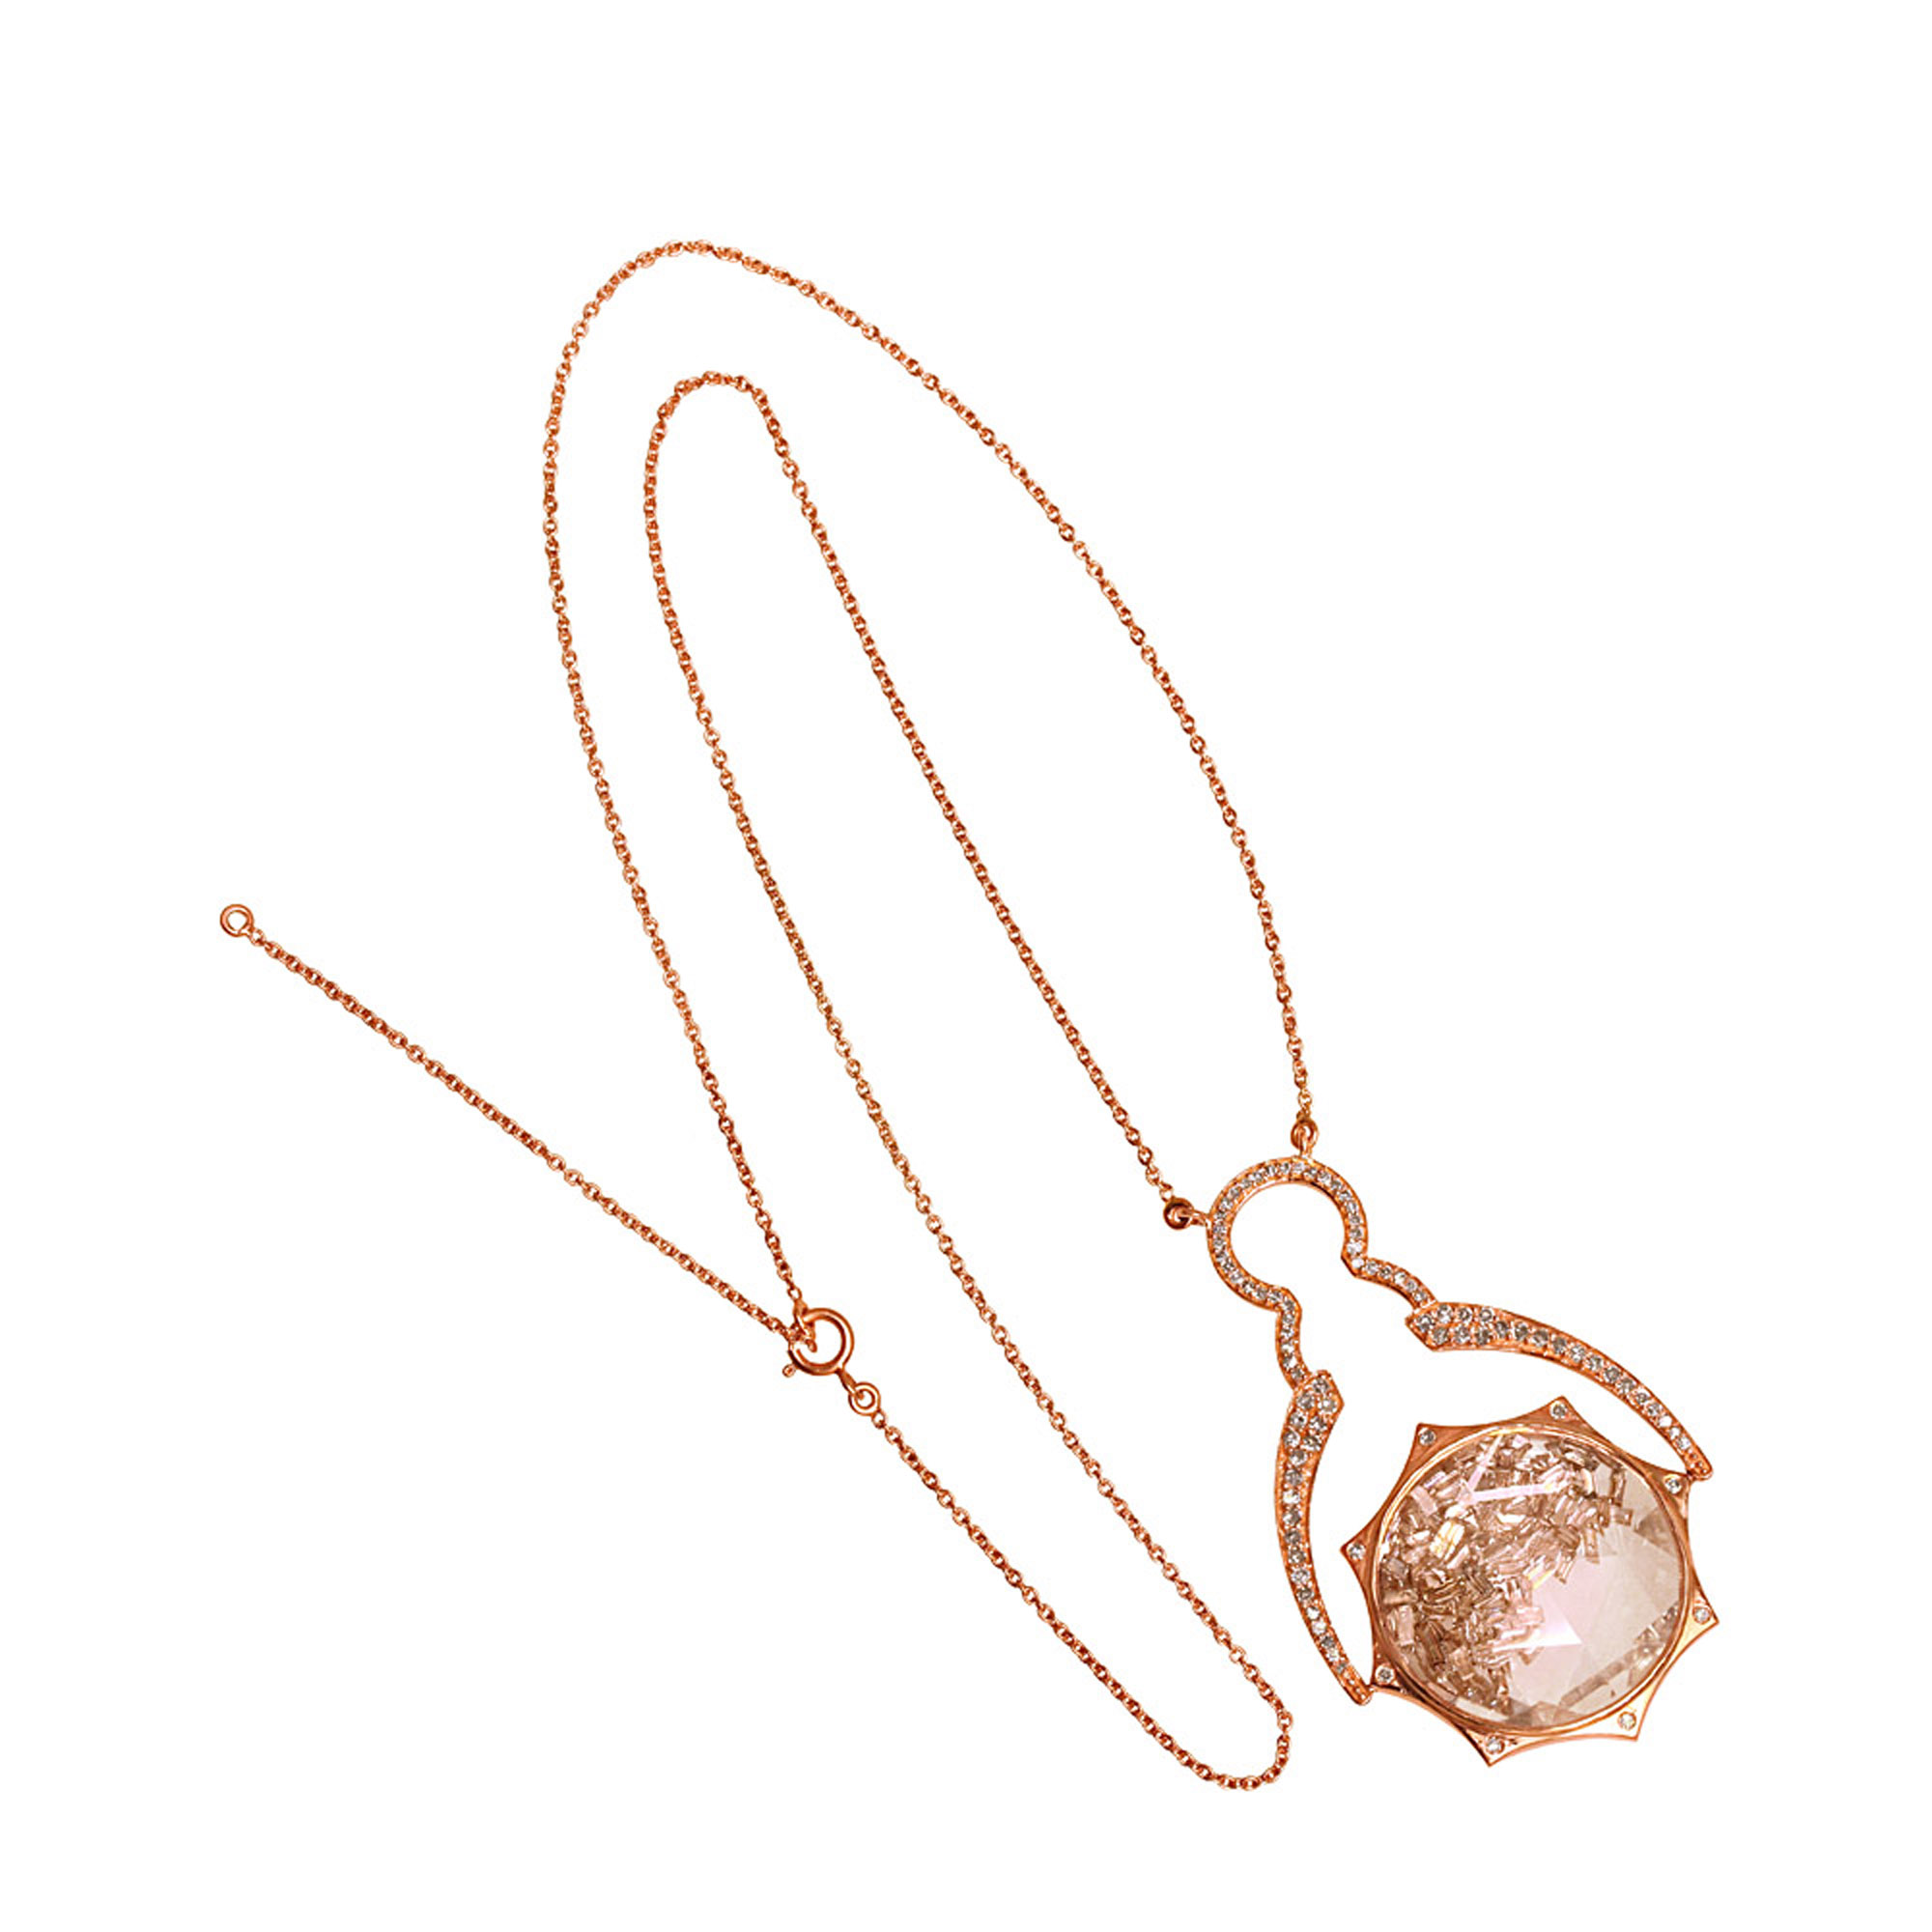 Diamond 18k solid rose gold crystal shaker pendant with chain